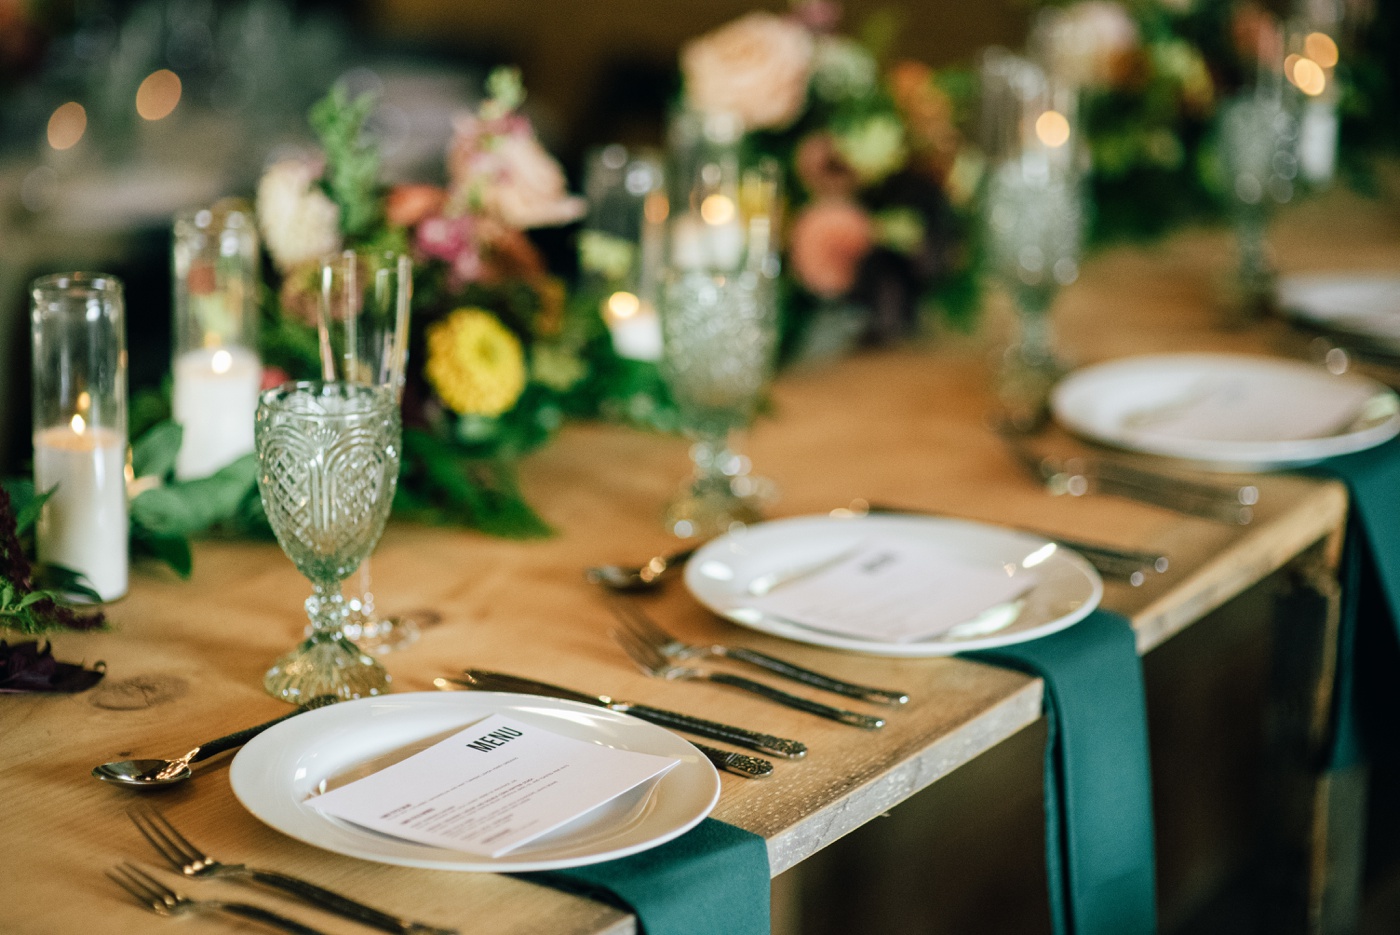 Turquoise linens and colorful floral centerpieces by Dutch Bloemen Winkel at a backyard wedding in NH